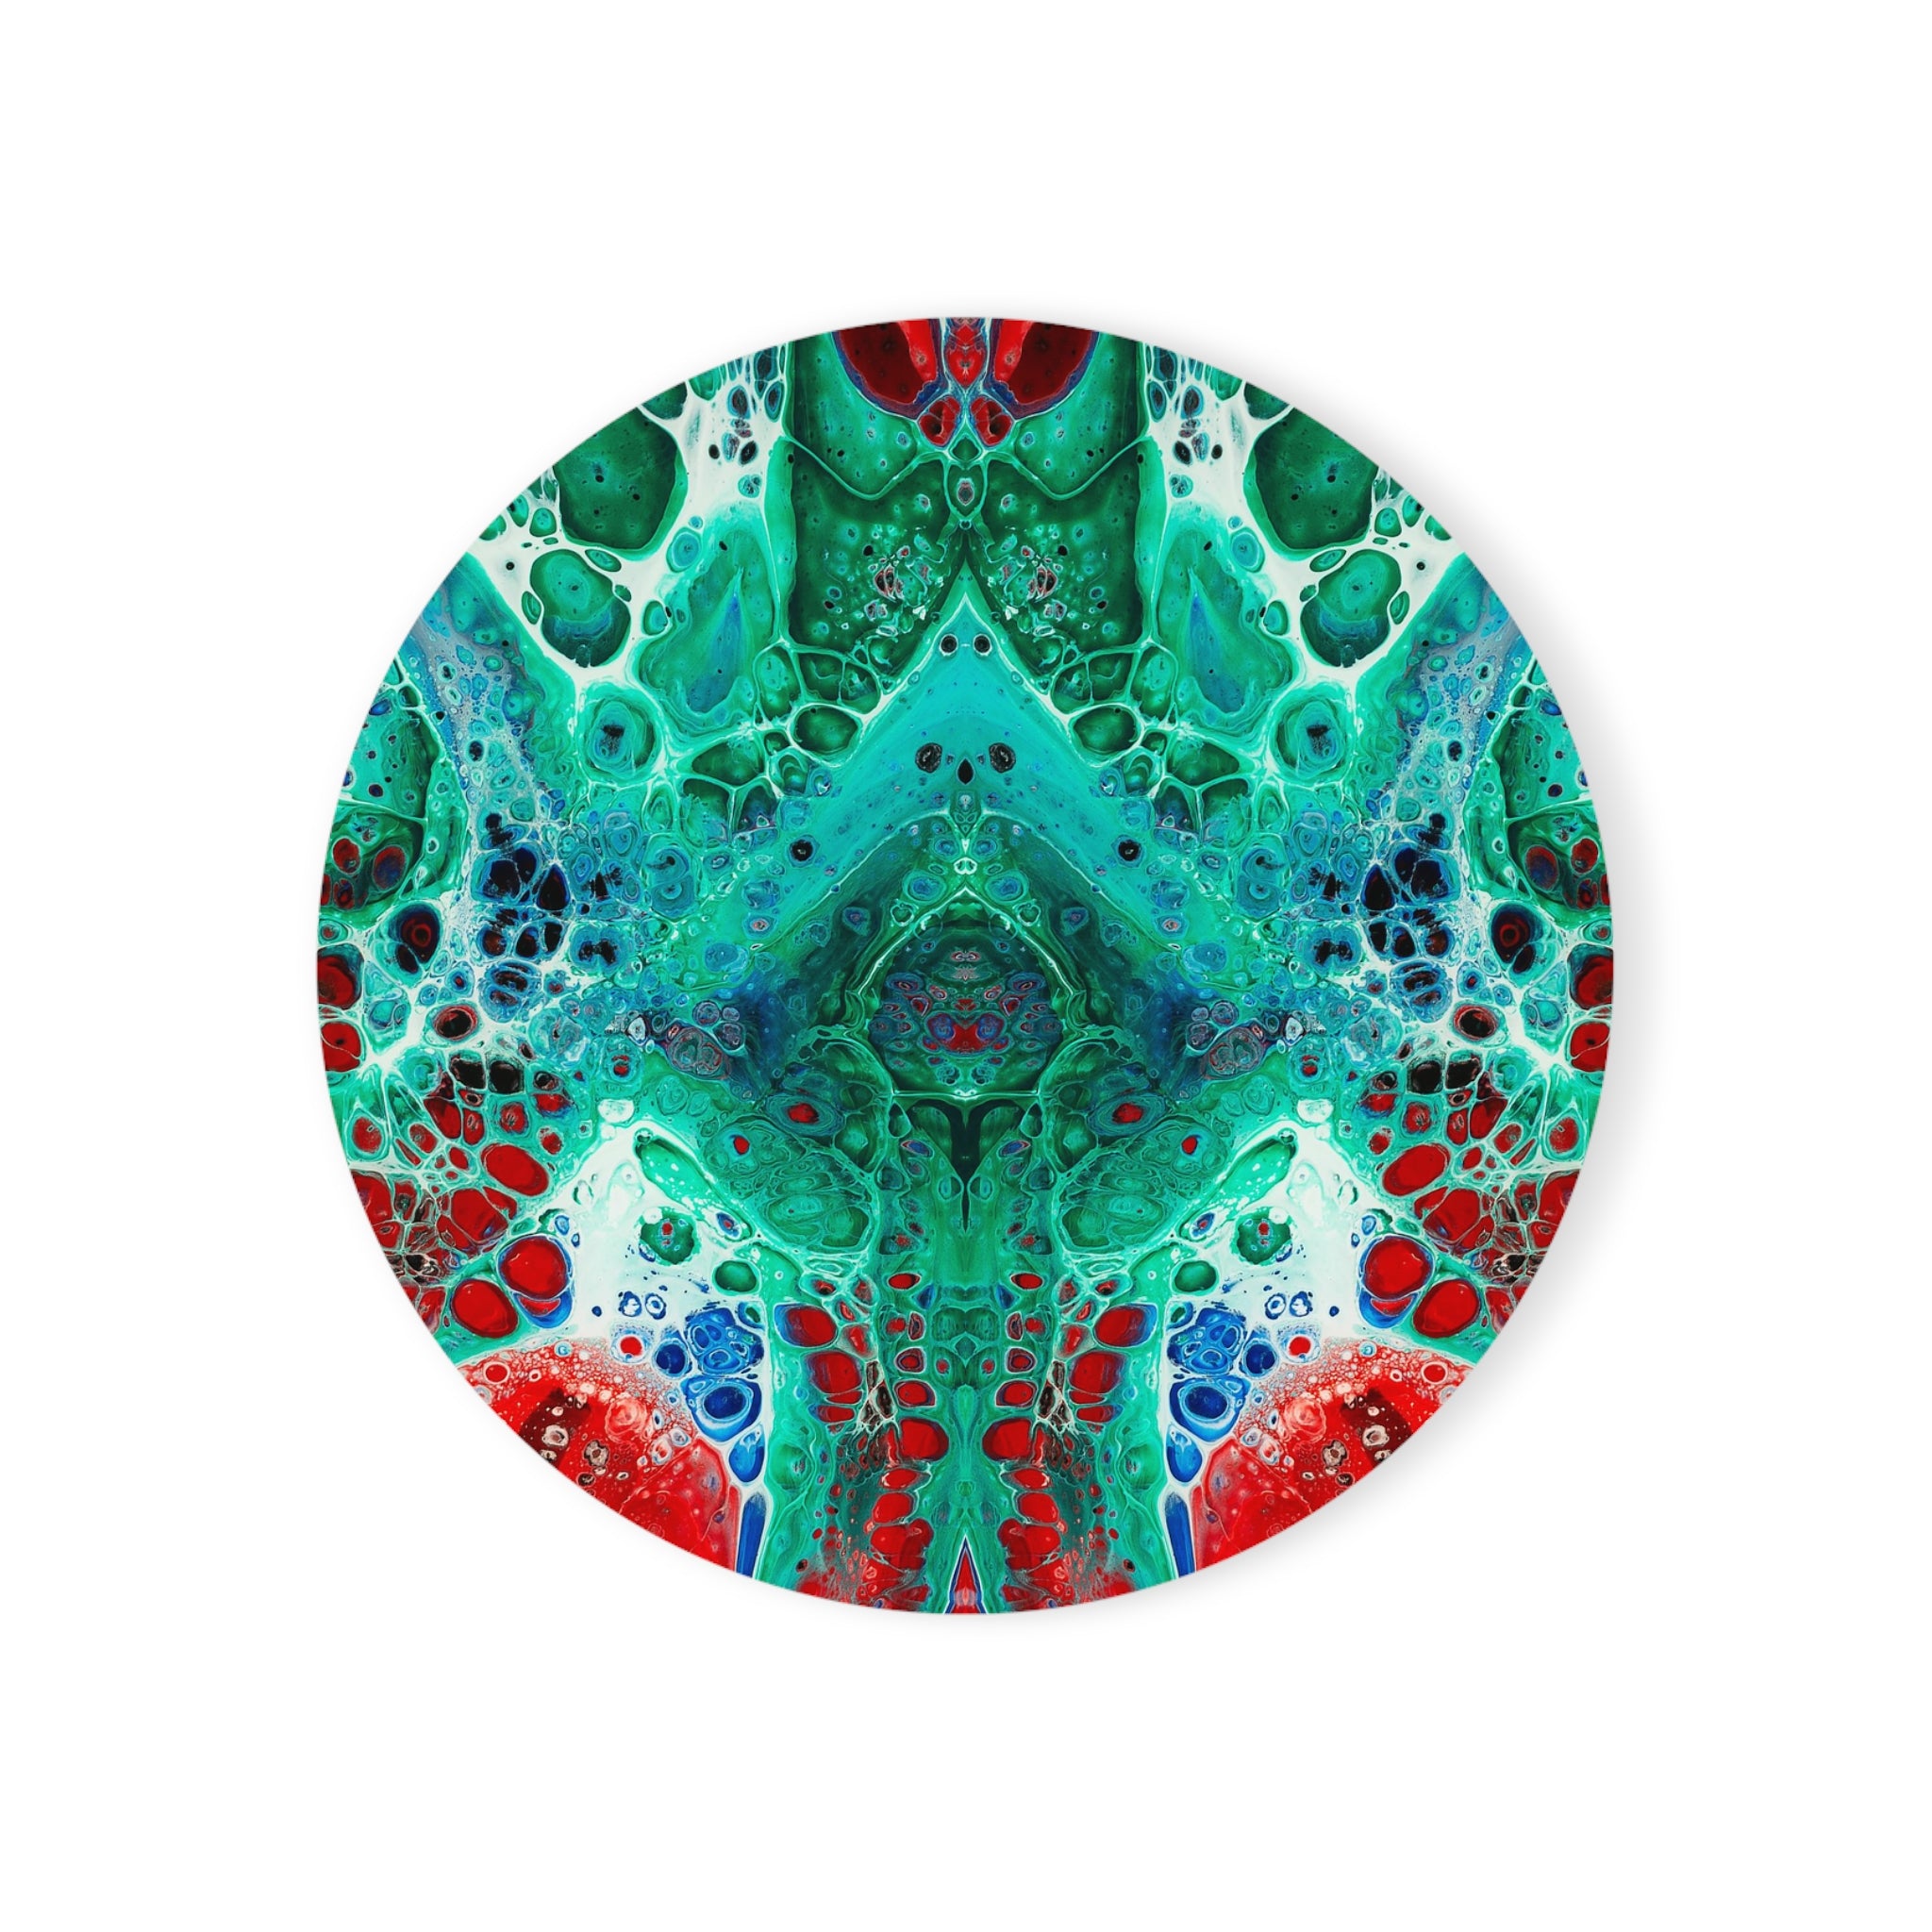 Cameron Creations - Convergence - Stylish Coffee Coaster - Circle Front